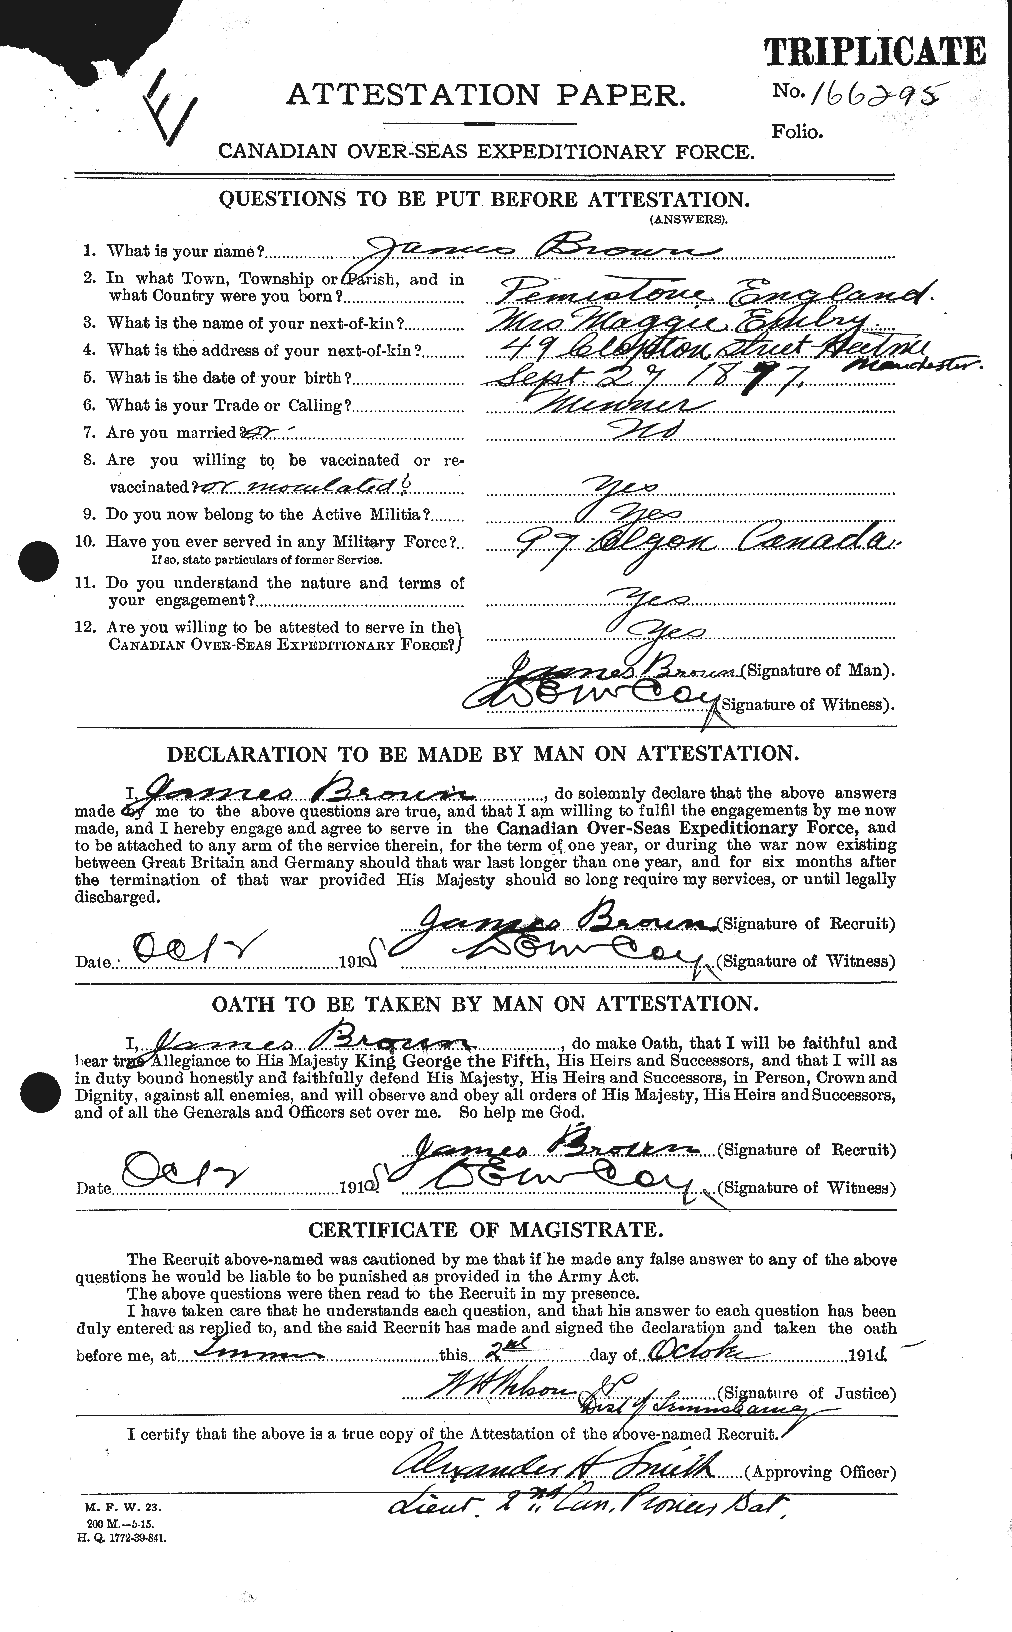 Personnel Records of the First World War - CEF 265730a